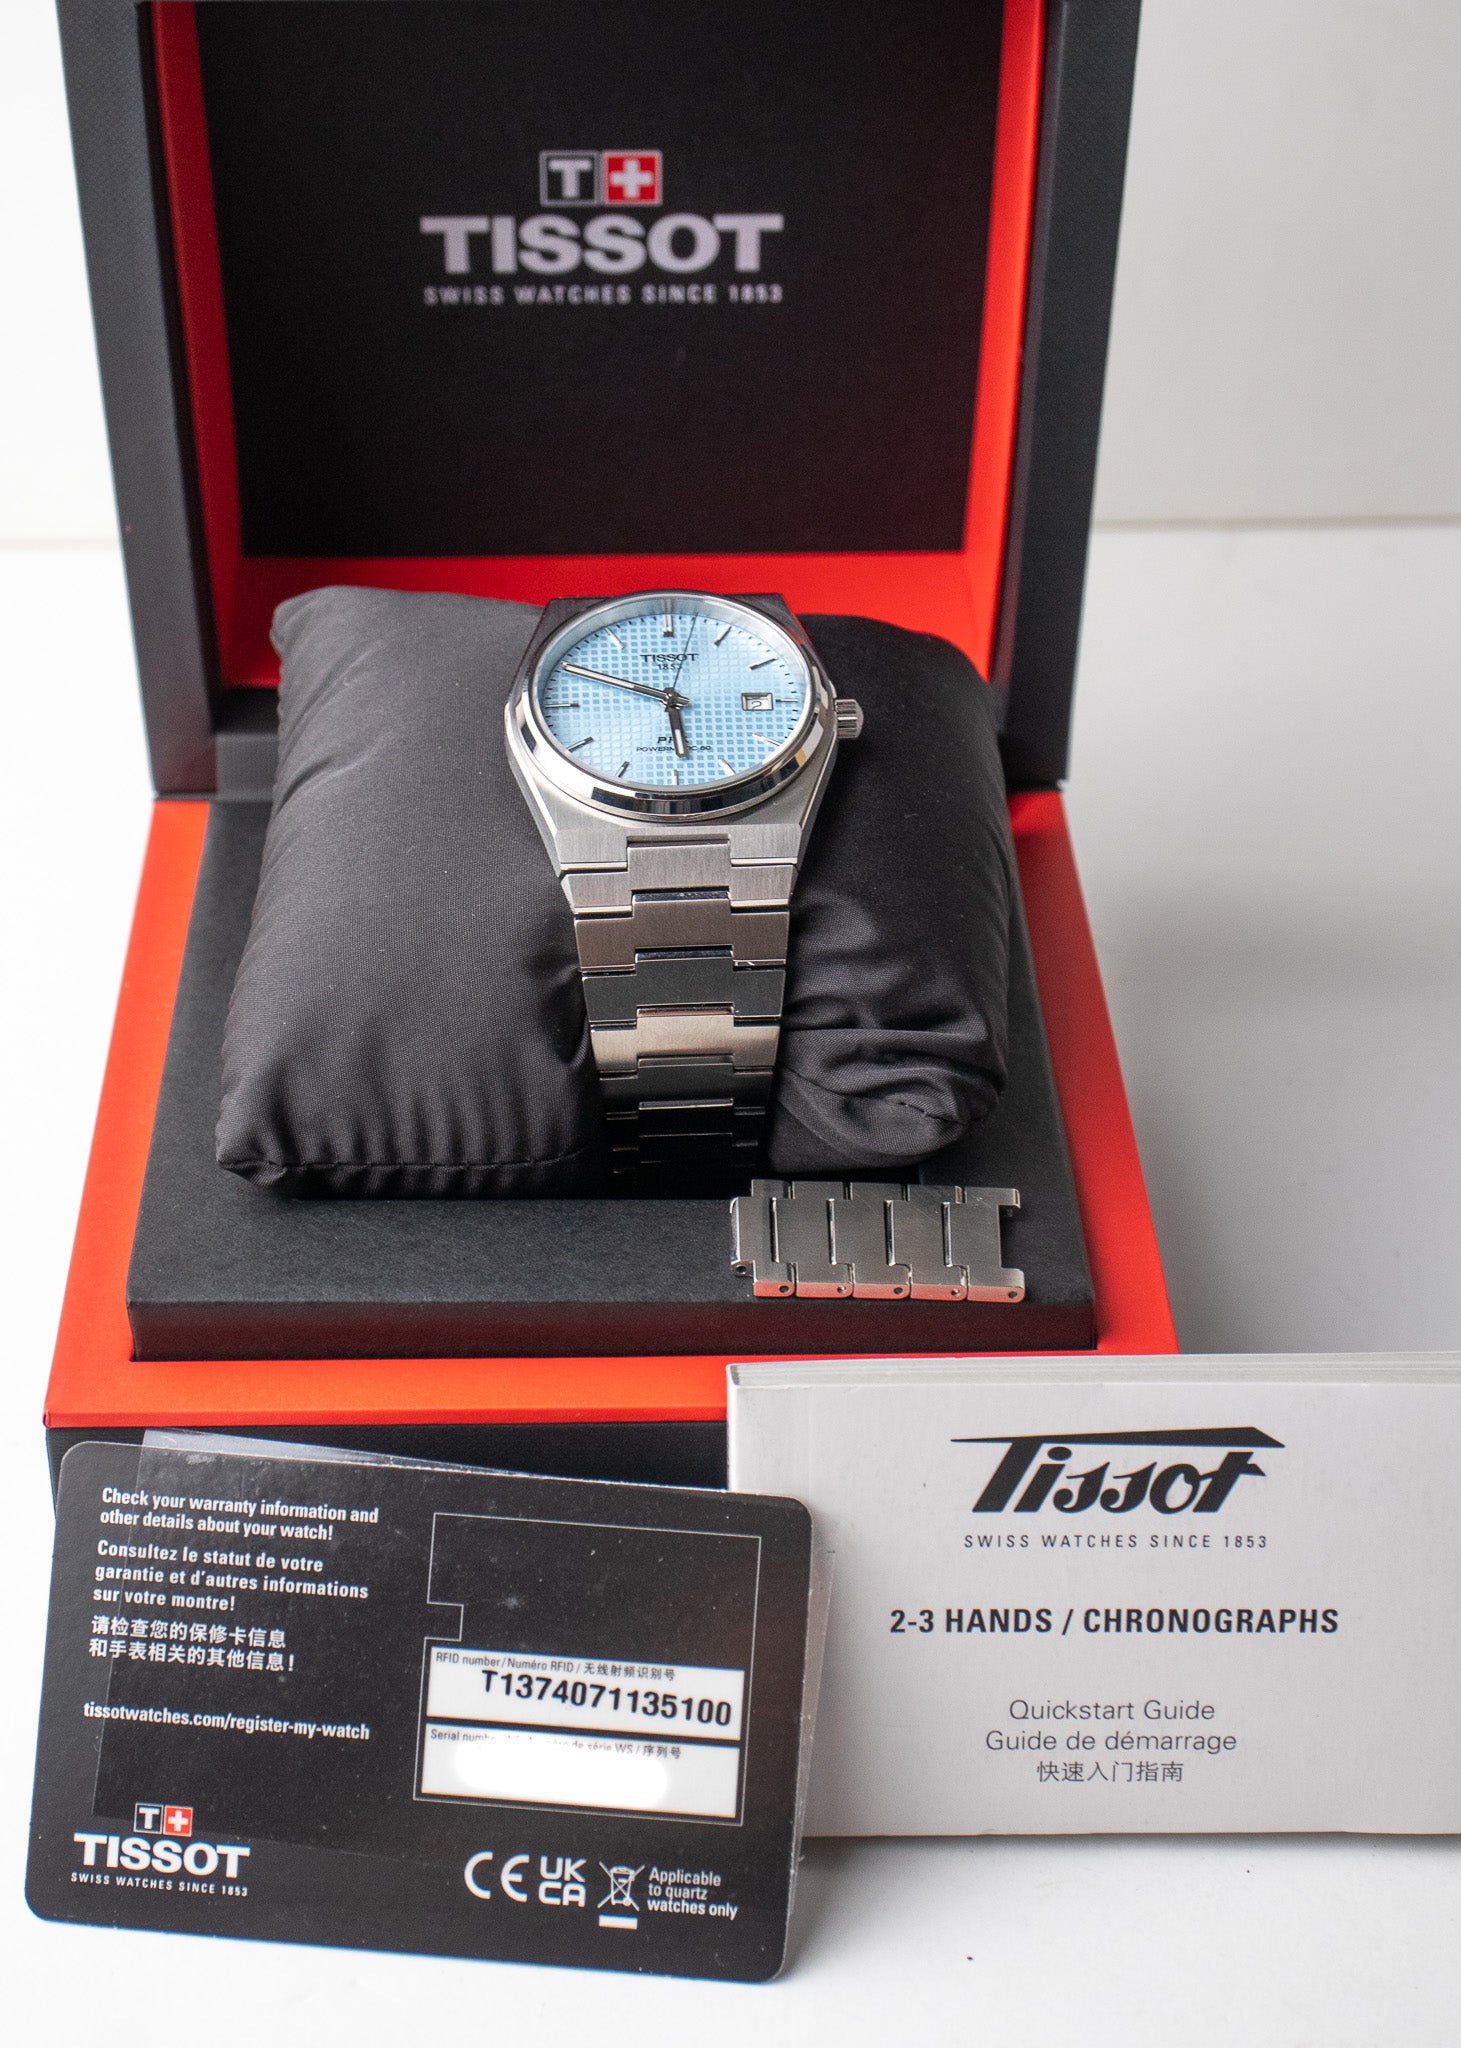 Tissot PRX Powermatic 80 reference T137.407.11.351.00 watch box, booklets and warranty card